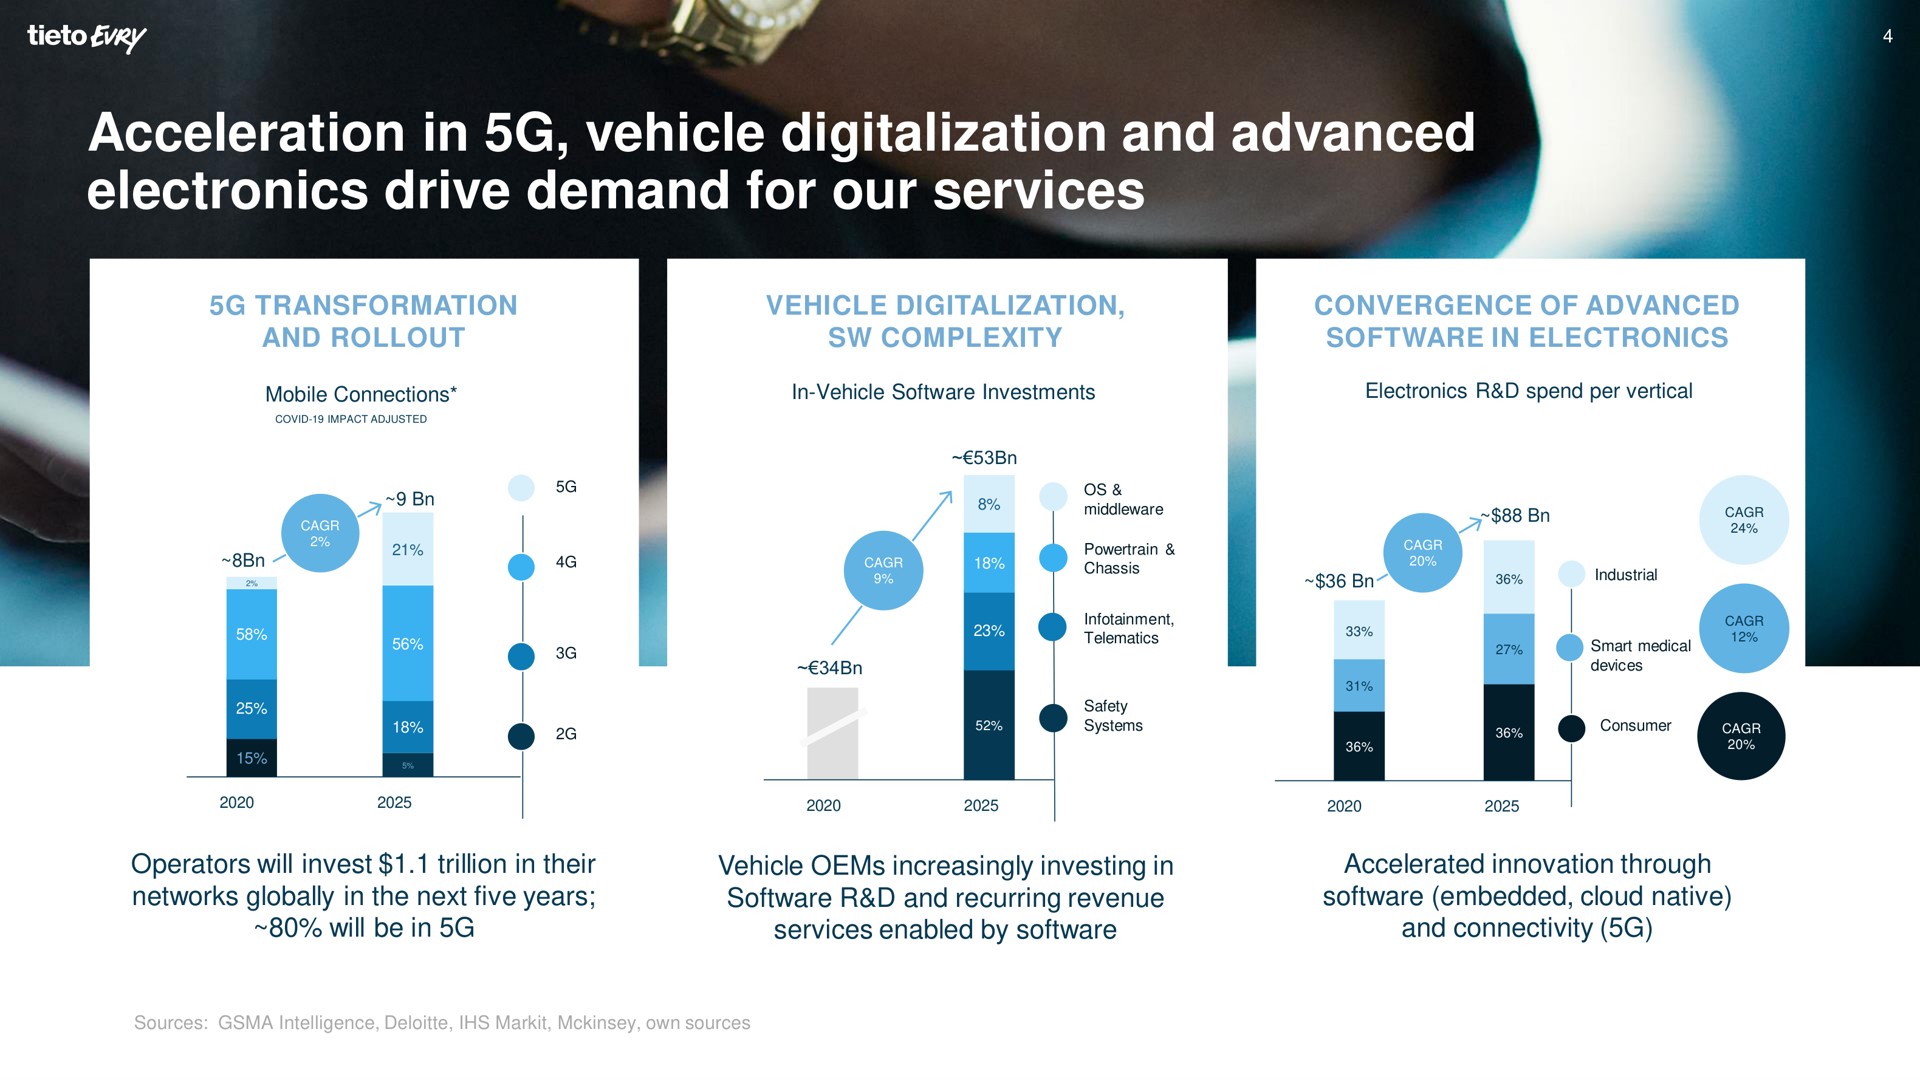 acceleration in vehicle digitalization and advanced electronics drive demand for our services | Tietoevry